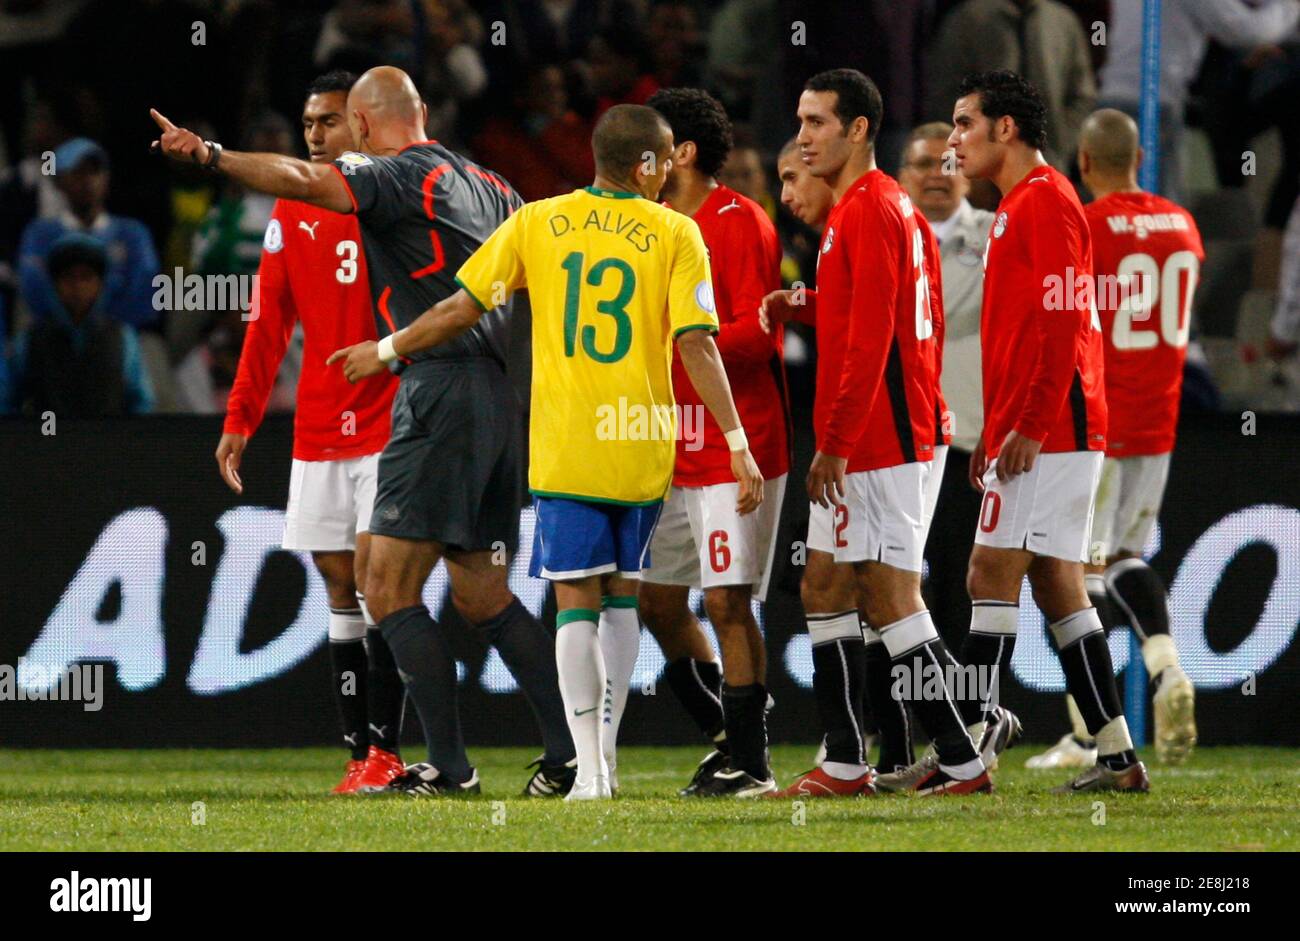 Egypt's Ahmed Al Muhammadi gets sent off with a red card during their Confederations Cup soccer match against Brazil at the Free State Stadium in Bloemfontein June 15, 2009.       REUTERS/Jerry Lampen (SOUTH AFRICA SPORT SOCCER) Stock Photo